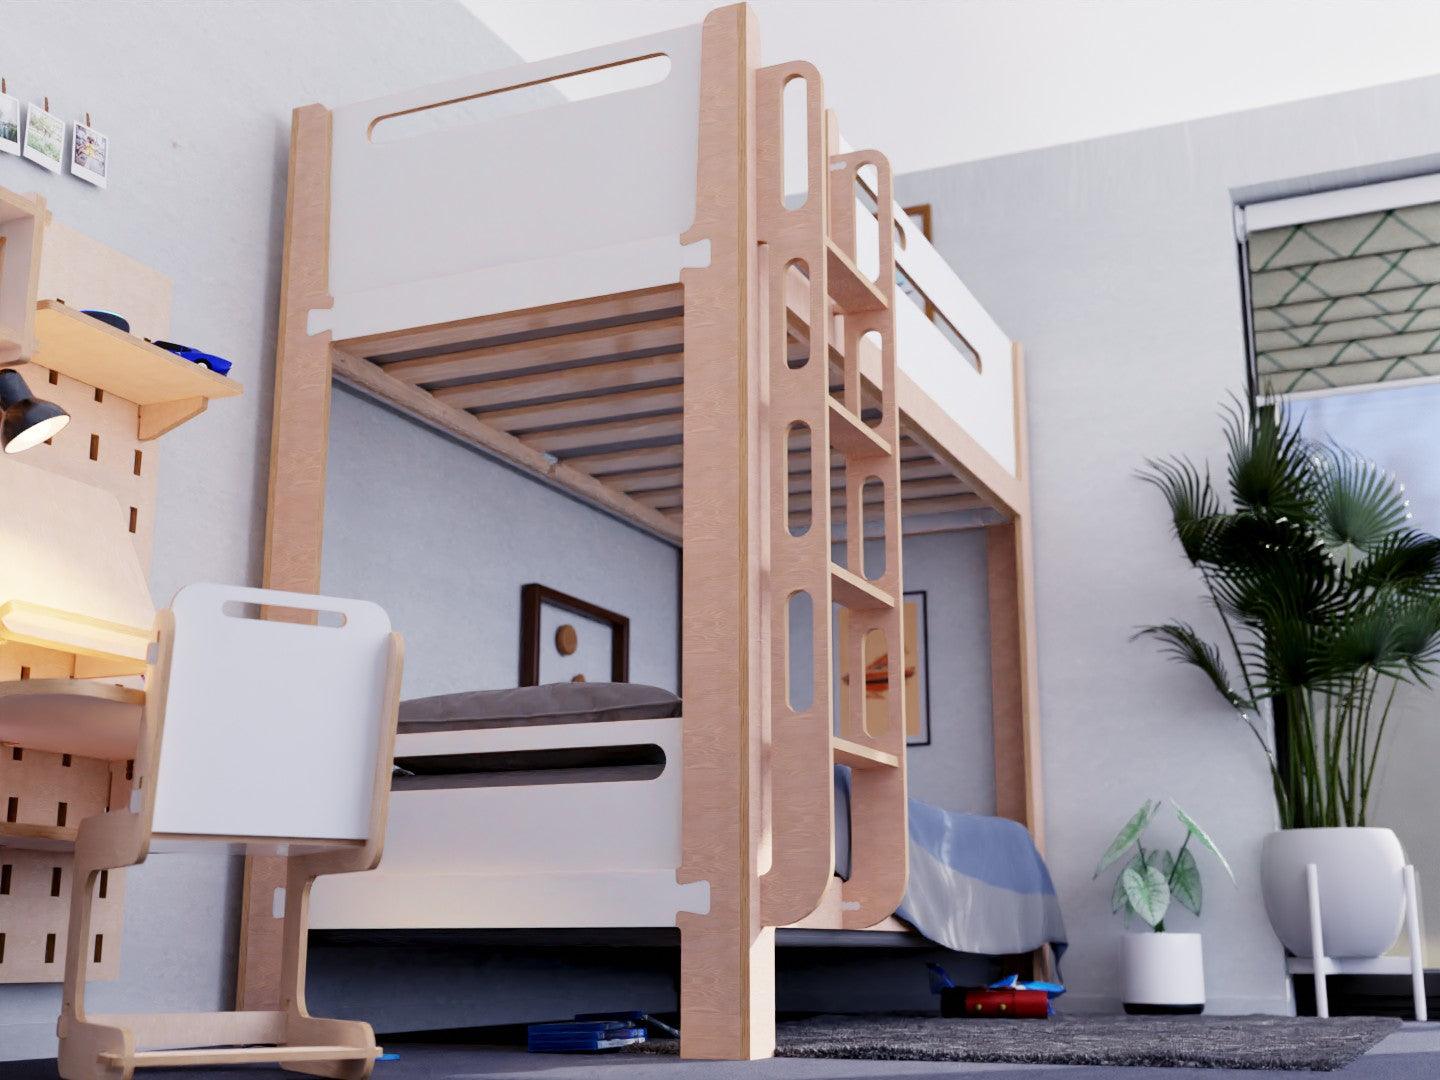 Explore elevated comfort with our plywood bunk beds. Includes study set, storage drawer, in vibrant colors!